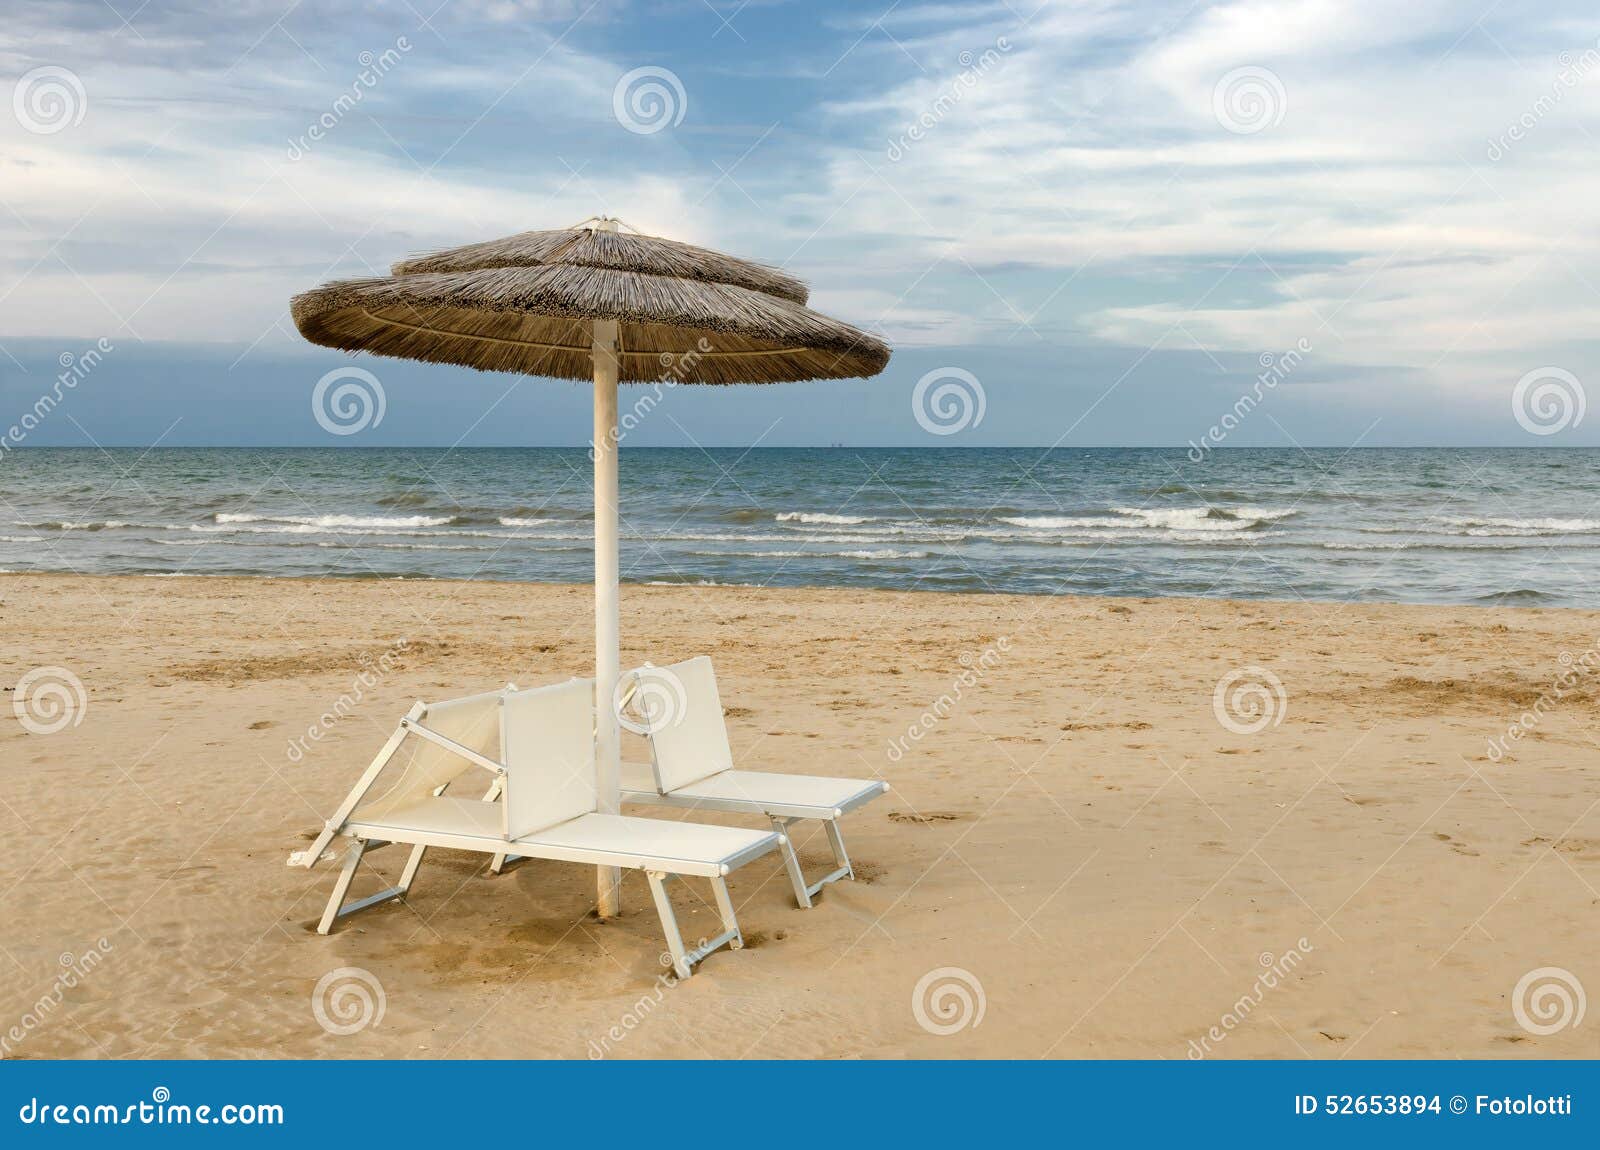 Beach with Umbrellas and Sunbeds Stock Photo - Image of retro, shade ...